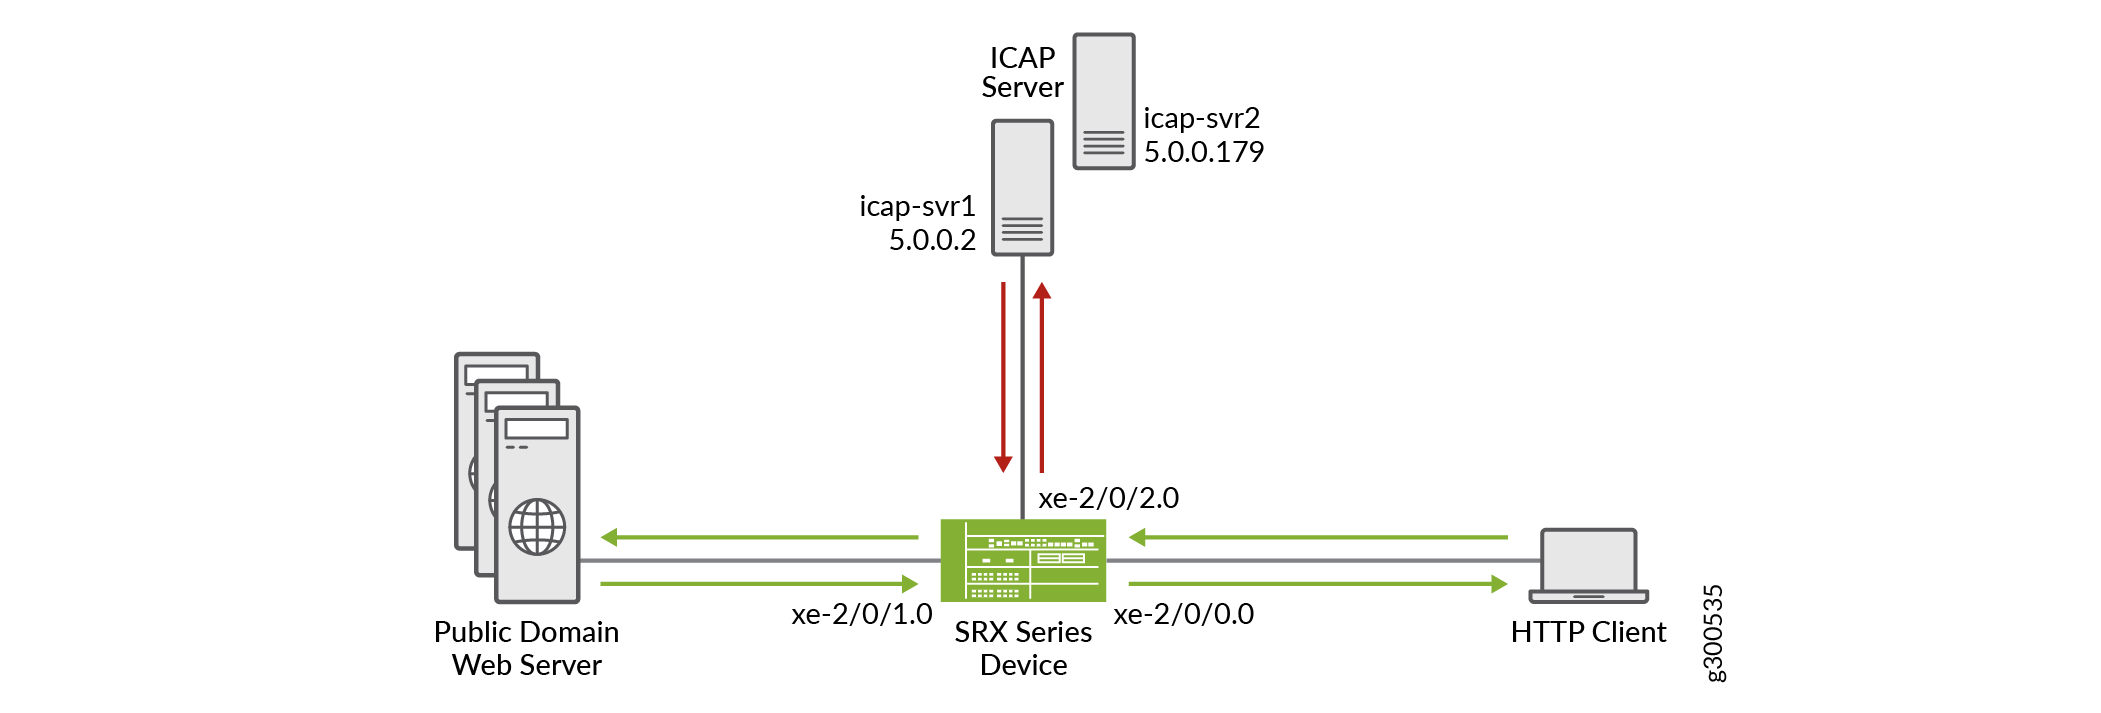 ICAP Redirect Topology